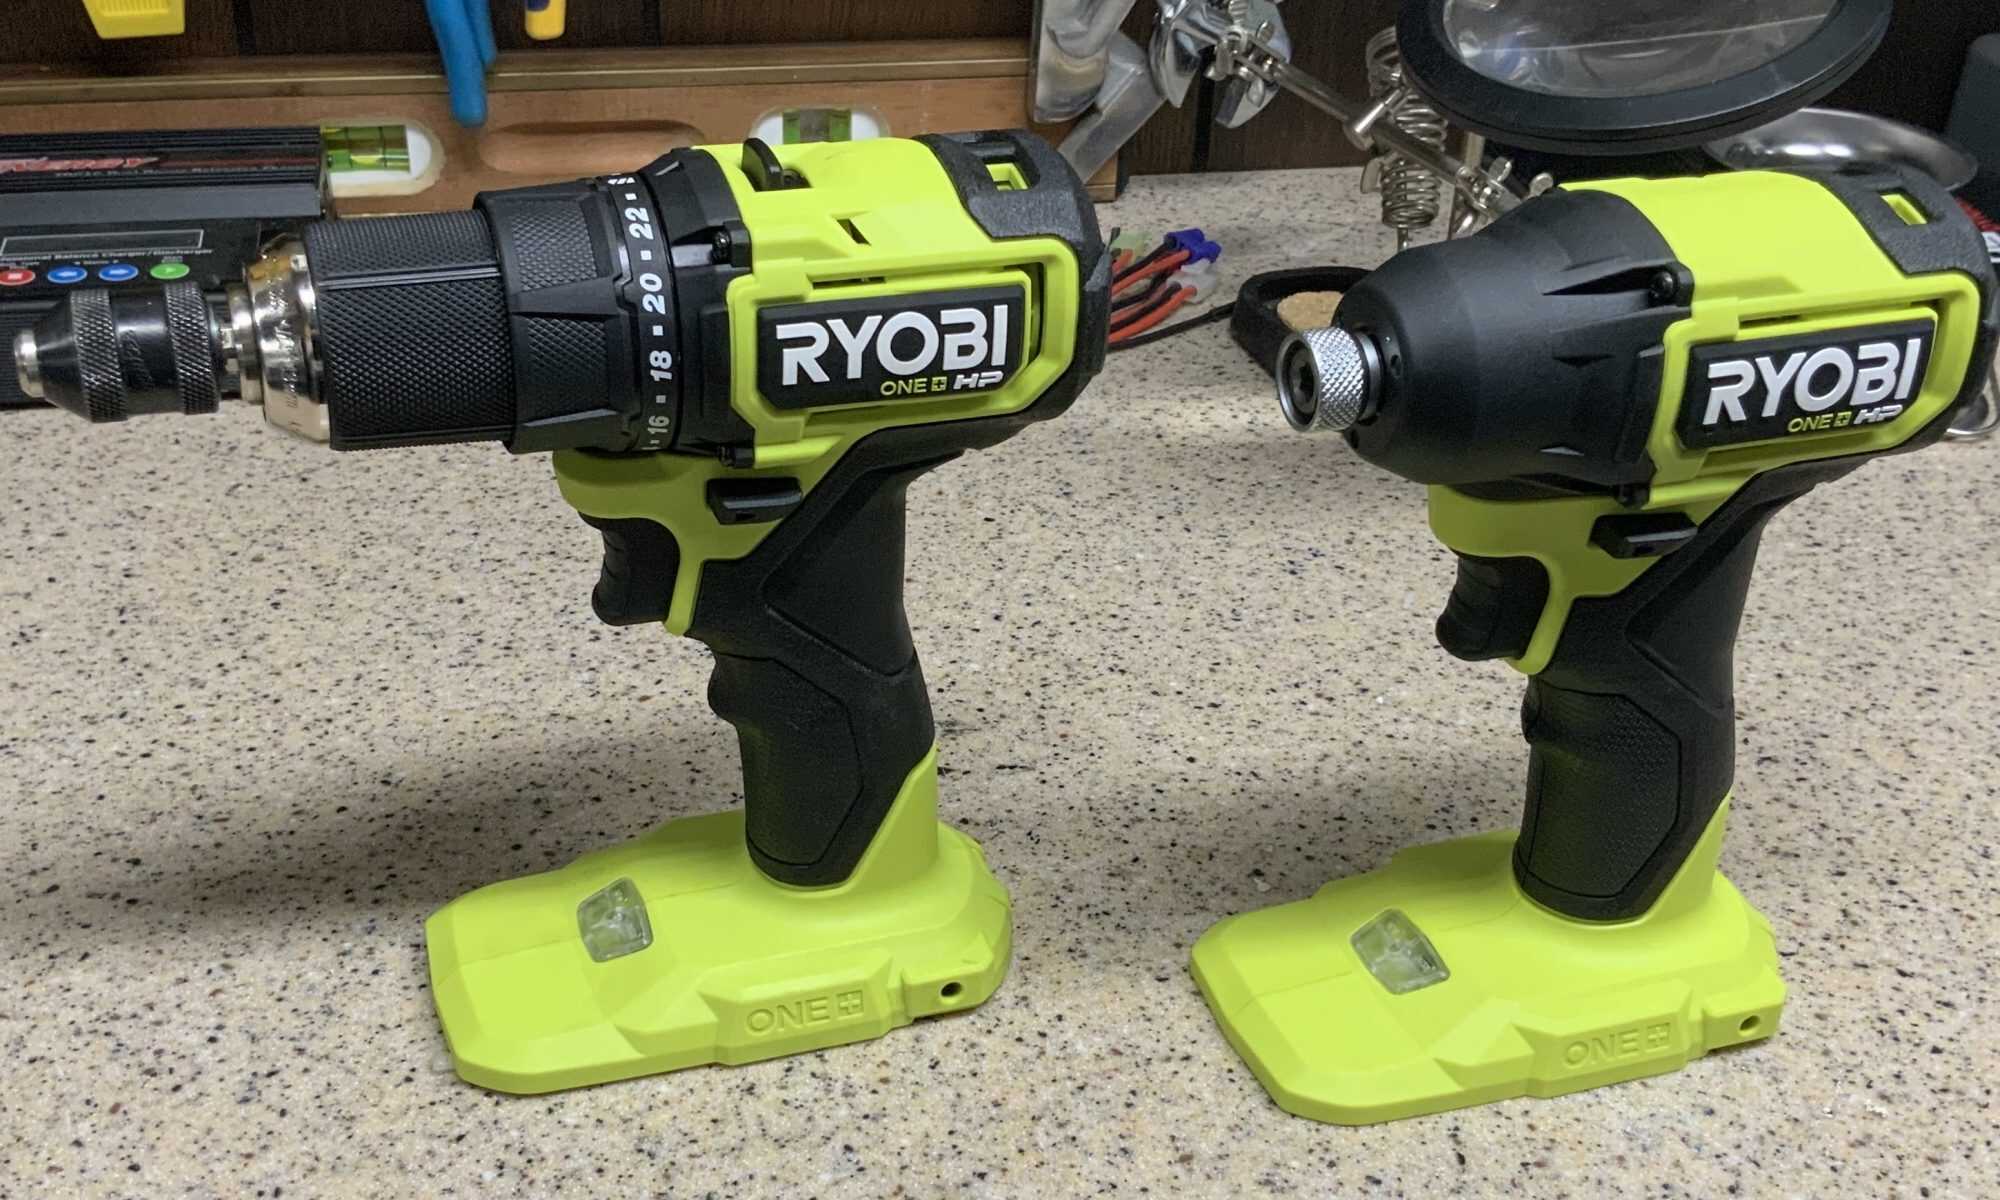 What Do The Numbers Mean In Ryobi Drill